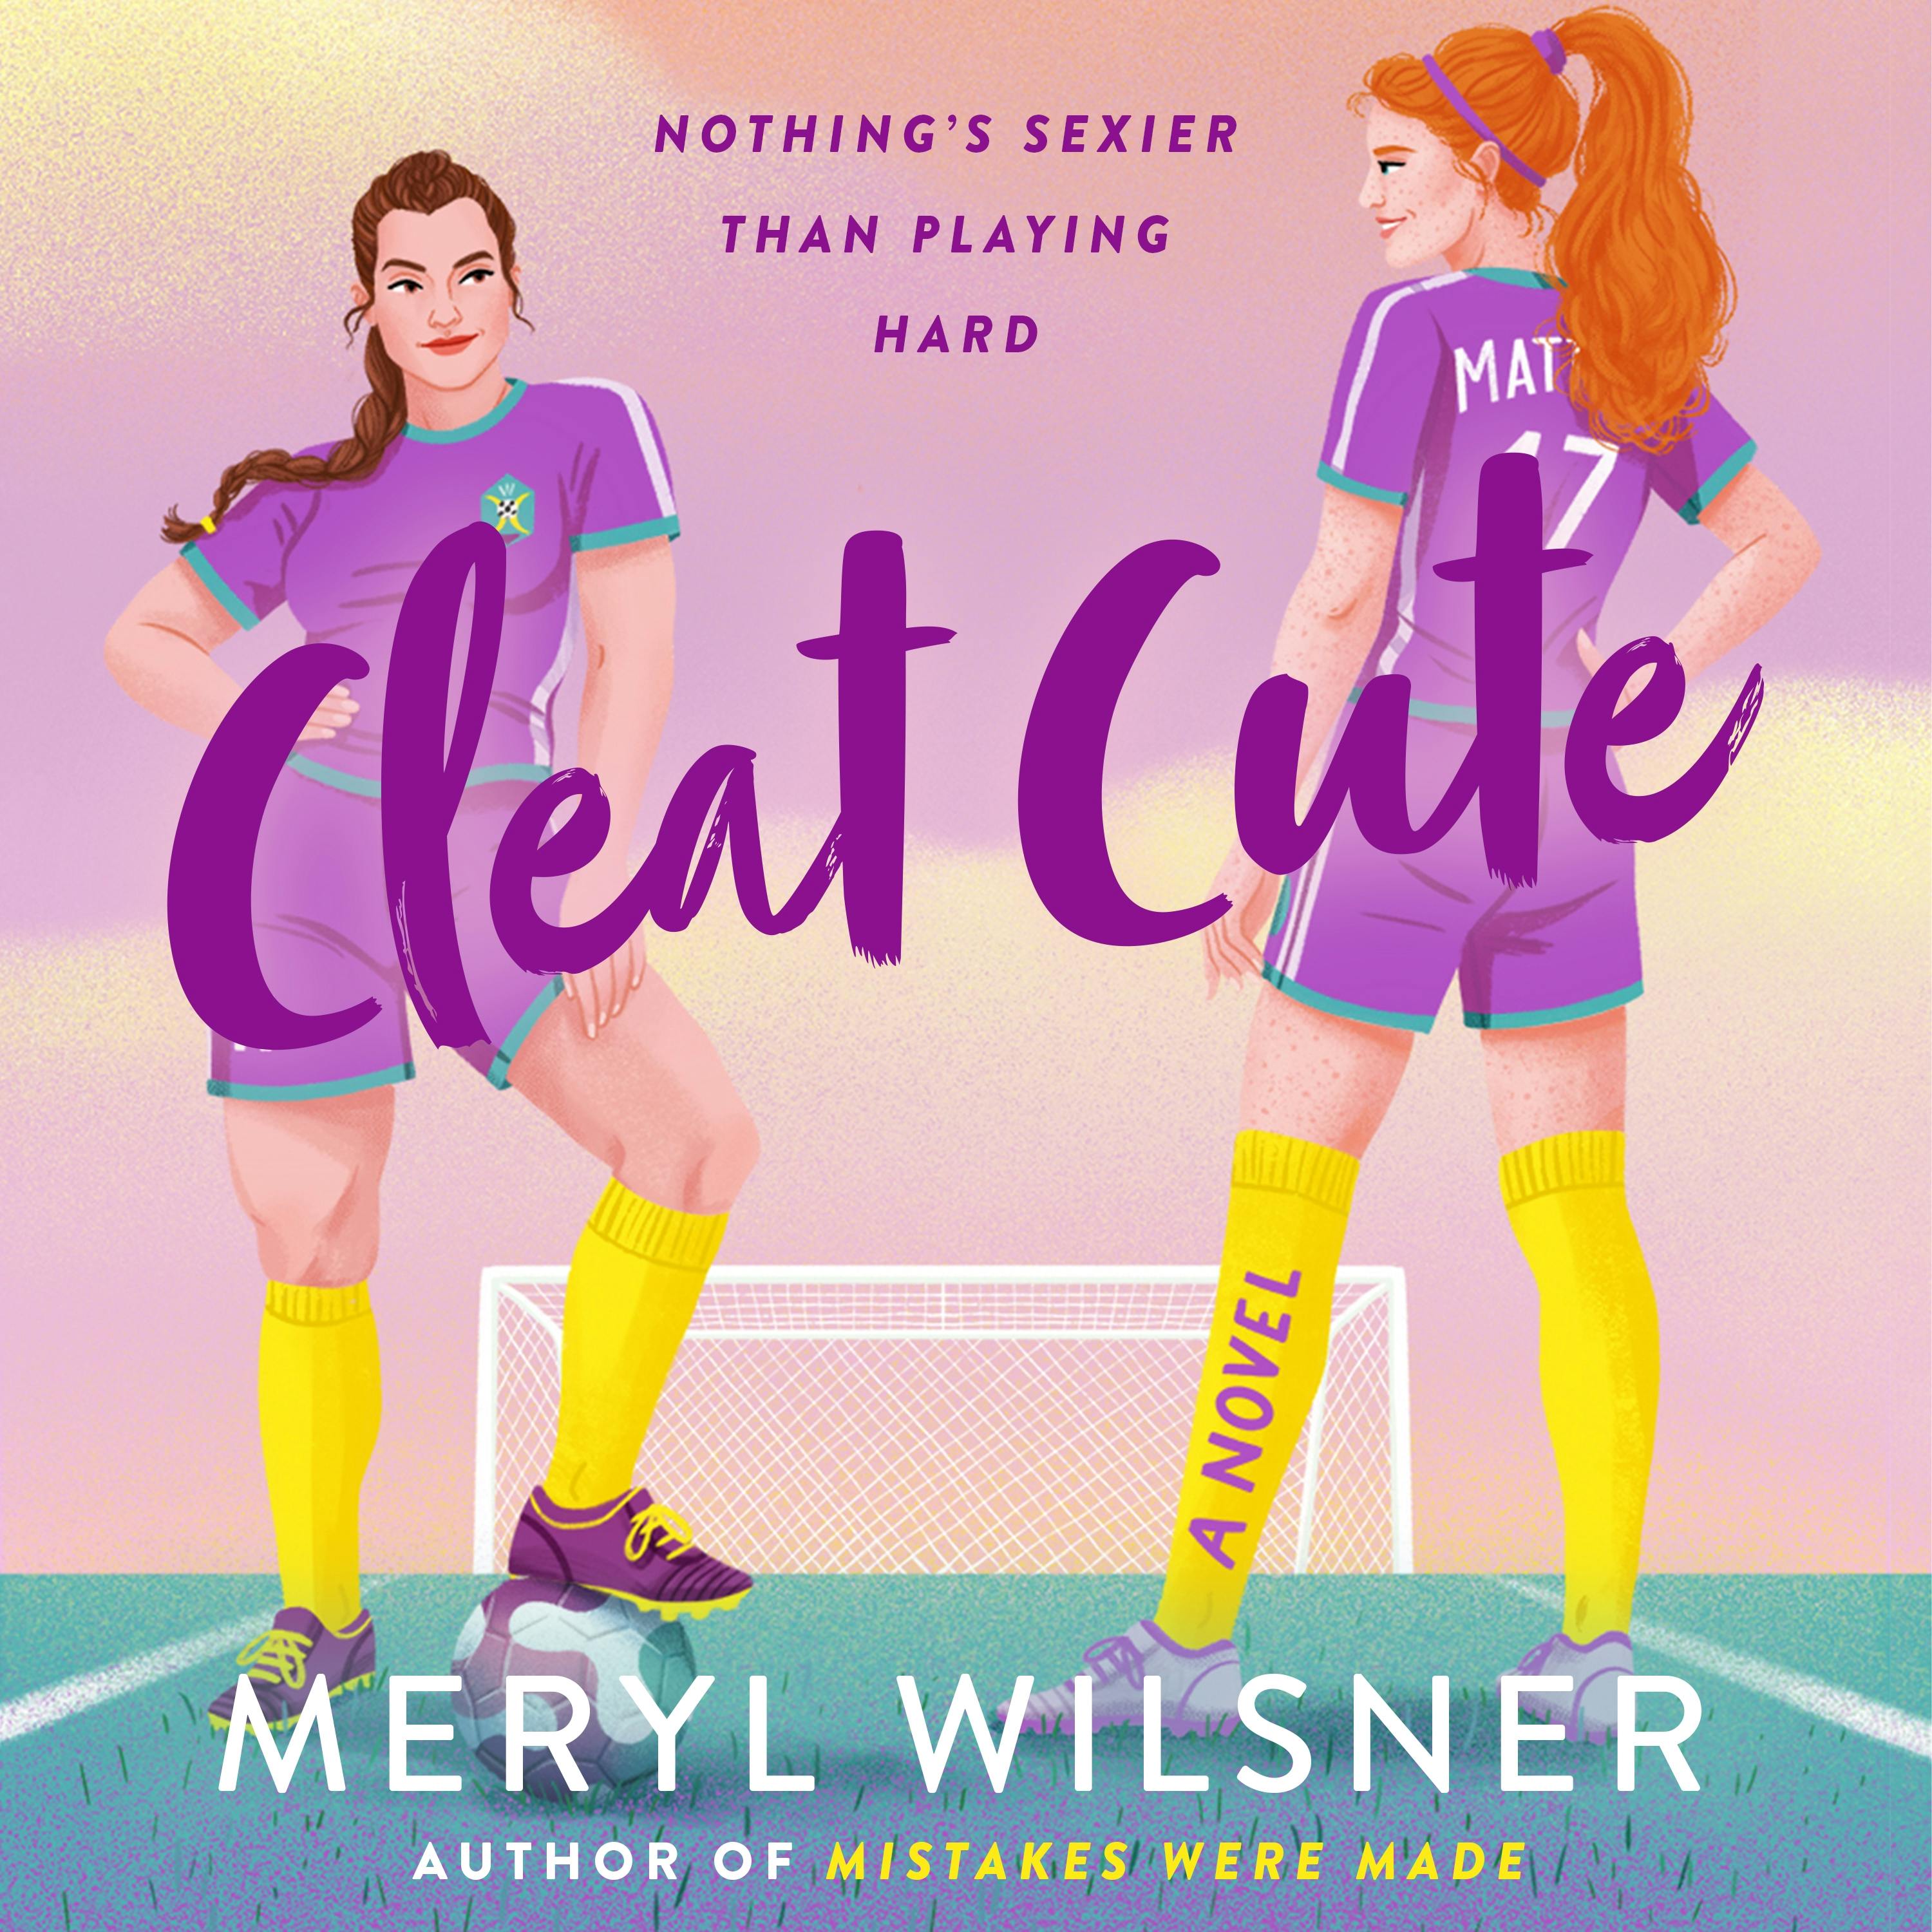 ✨New Releases ✨ It's new release day and we are living the romance/romcom  lover's dream! Cleat Cute by Meryl Wilsner (fiction. Romcom.…